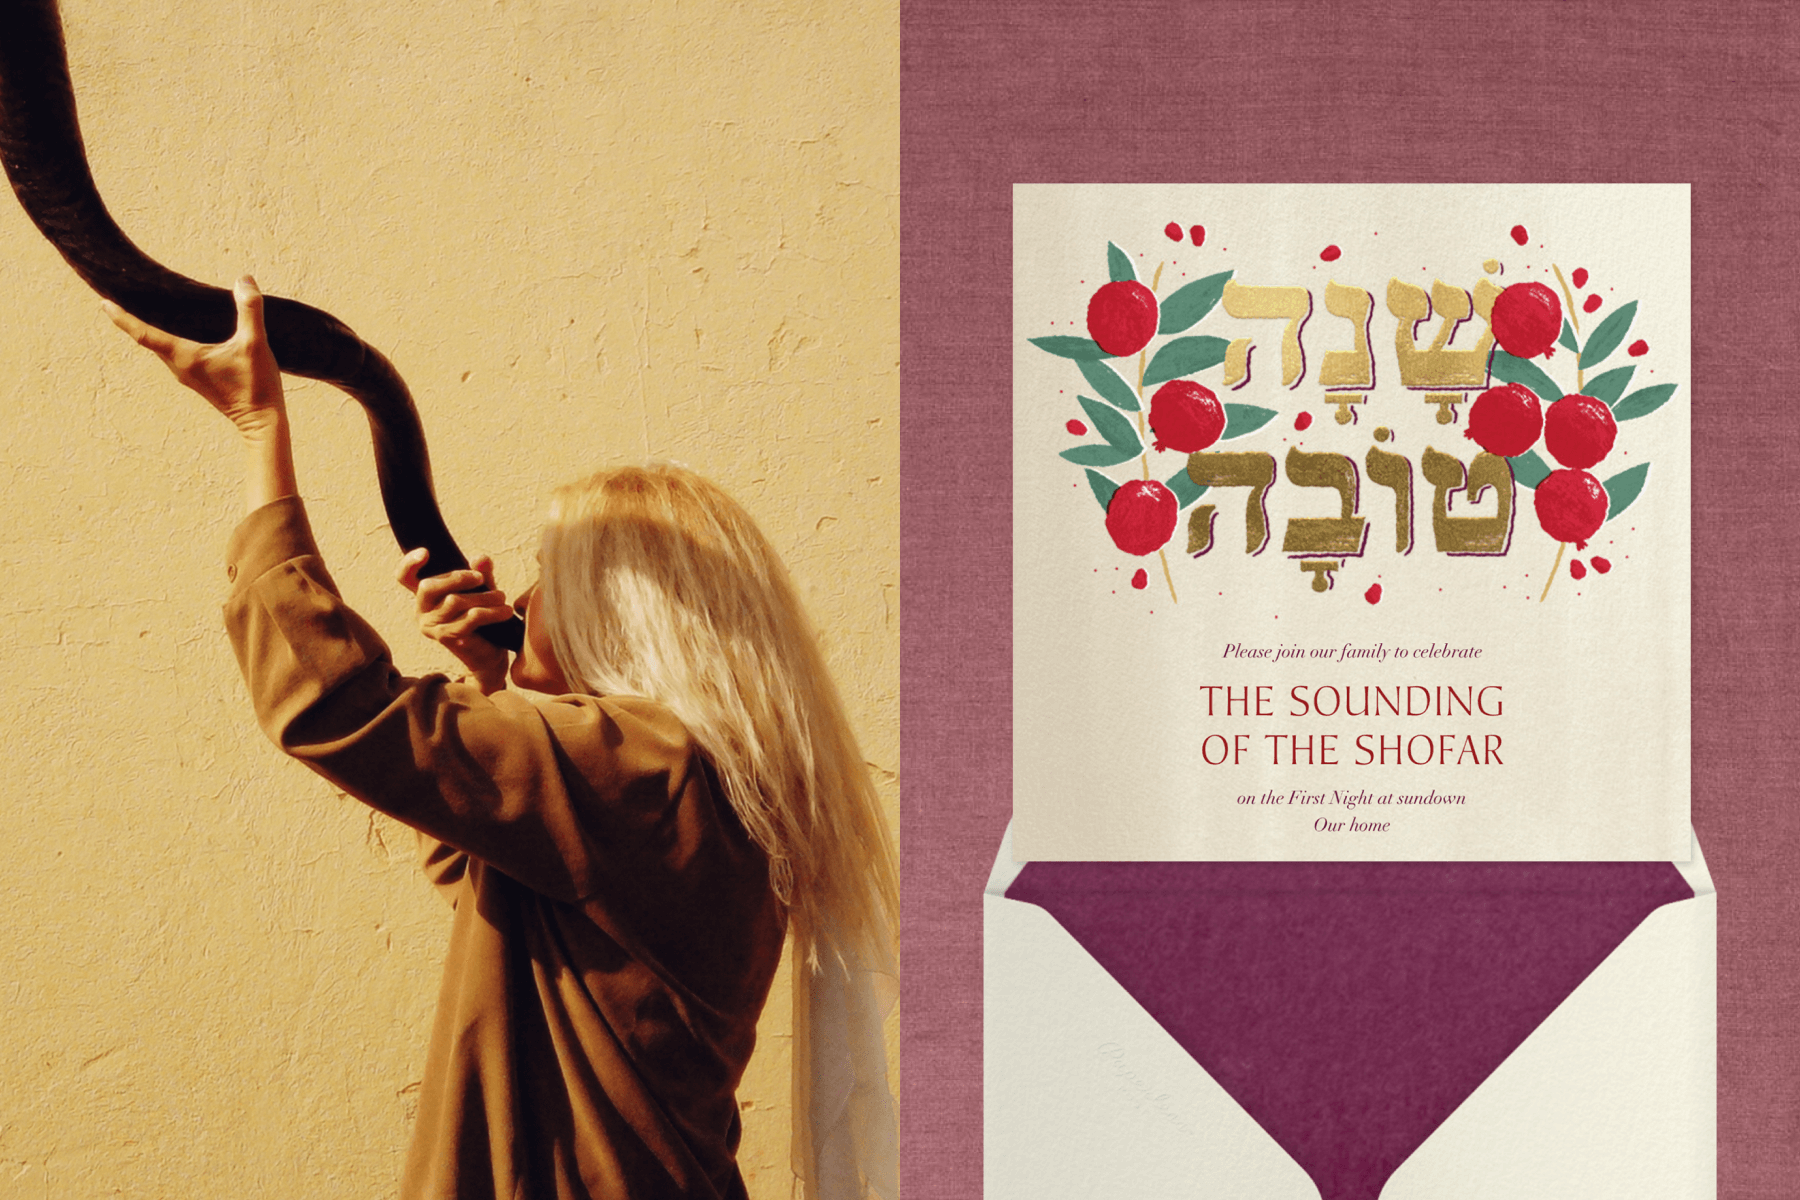 Left: A person blowing a shofar. Right: A Rosh Hashanah invitation with gold Hebrew lettering and painted pomegranates.